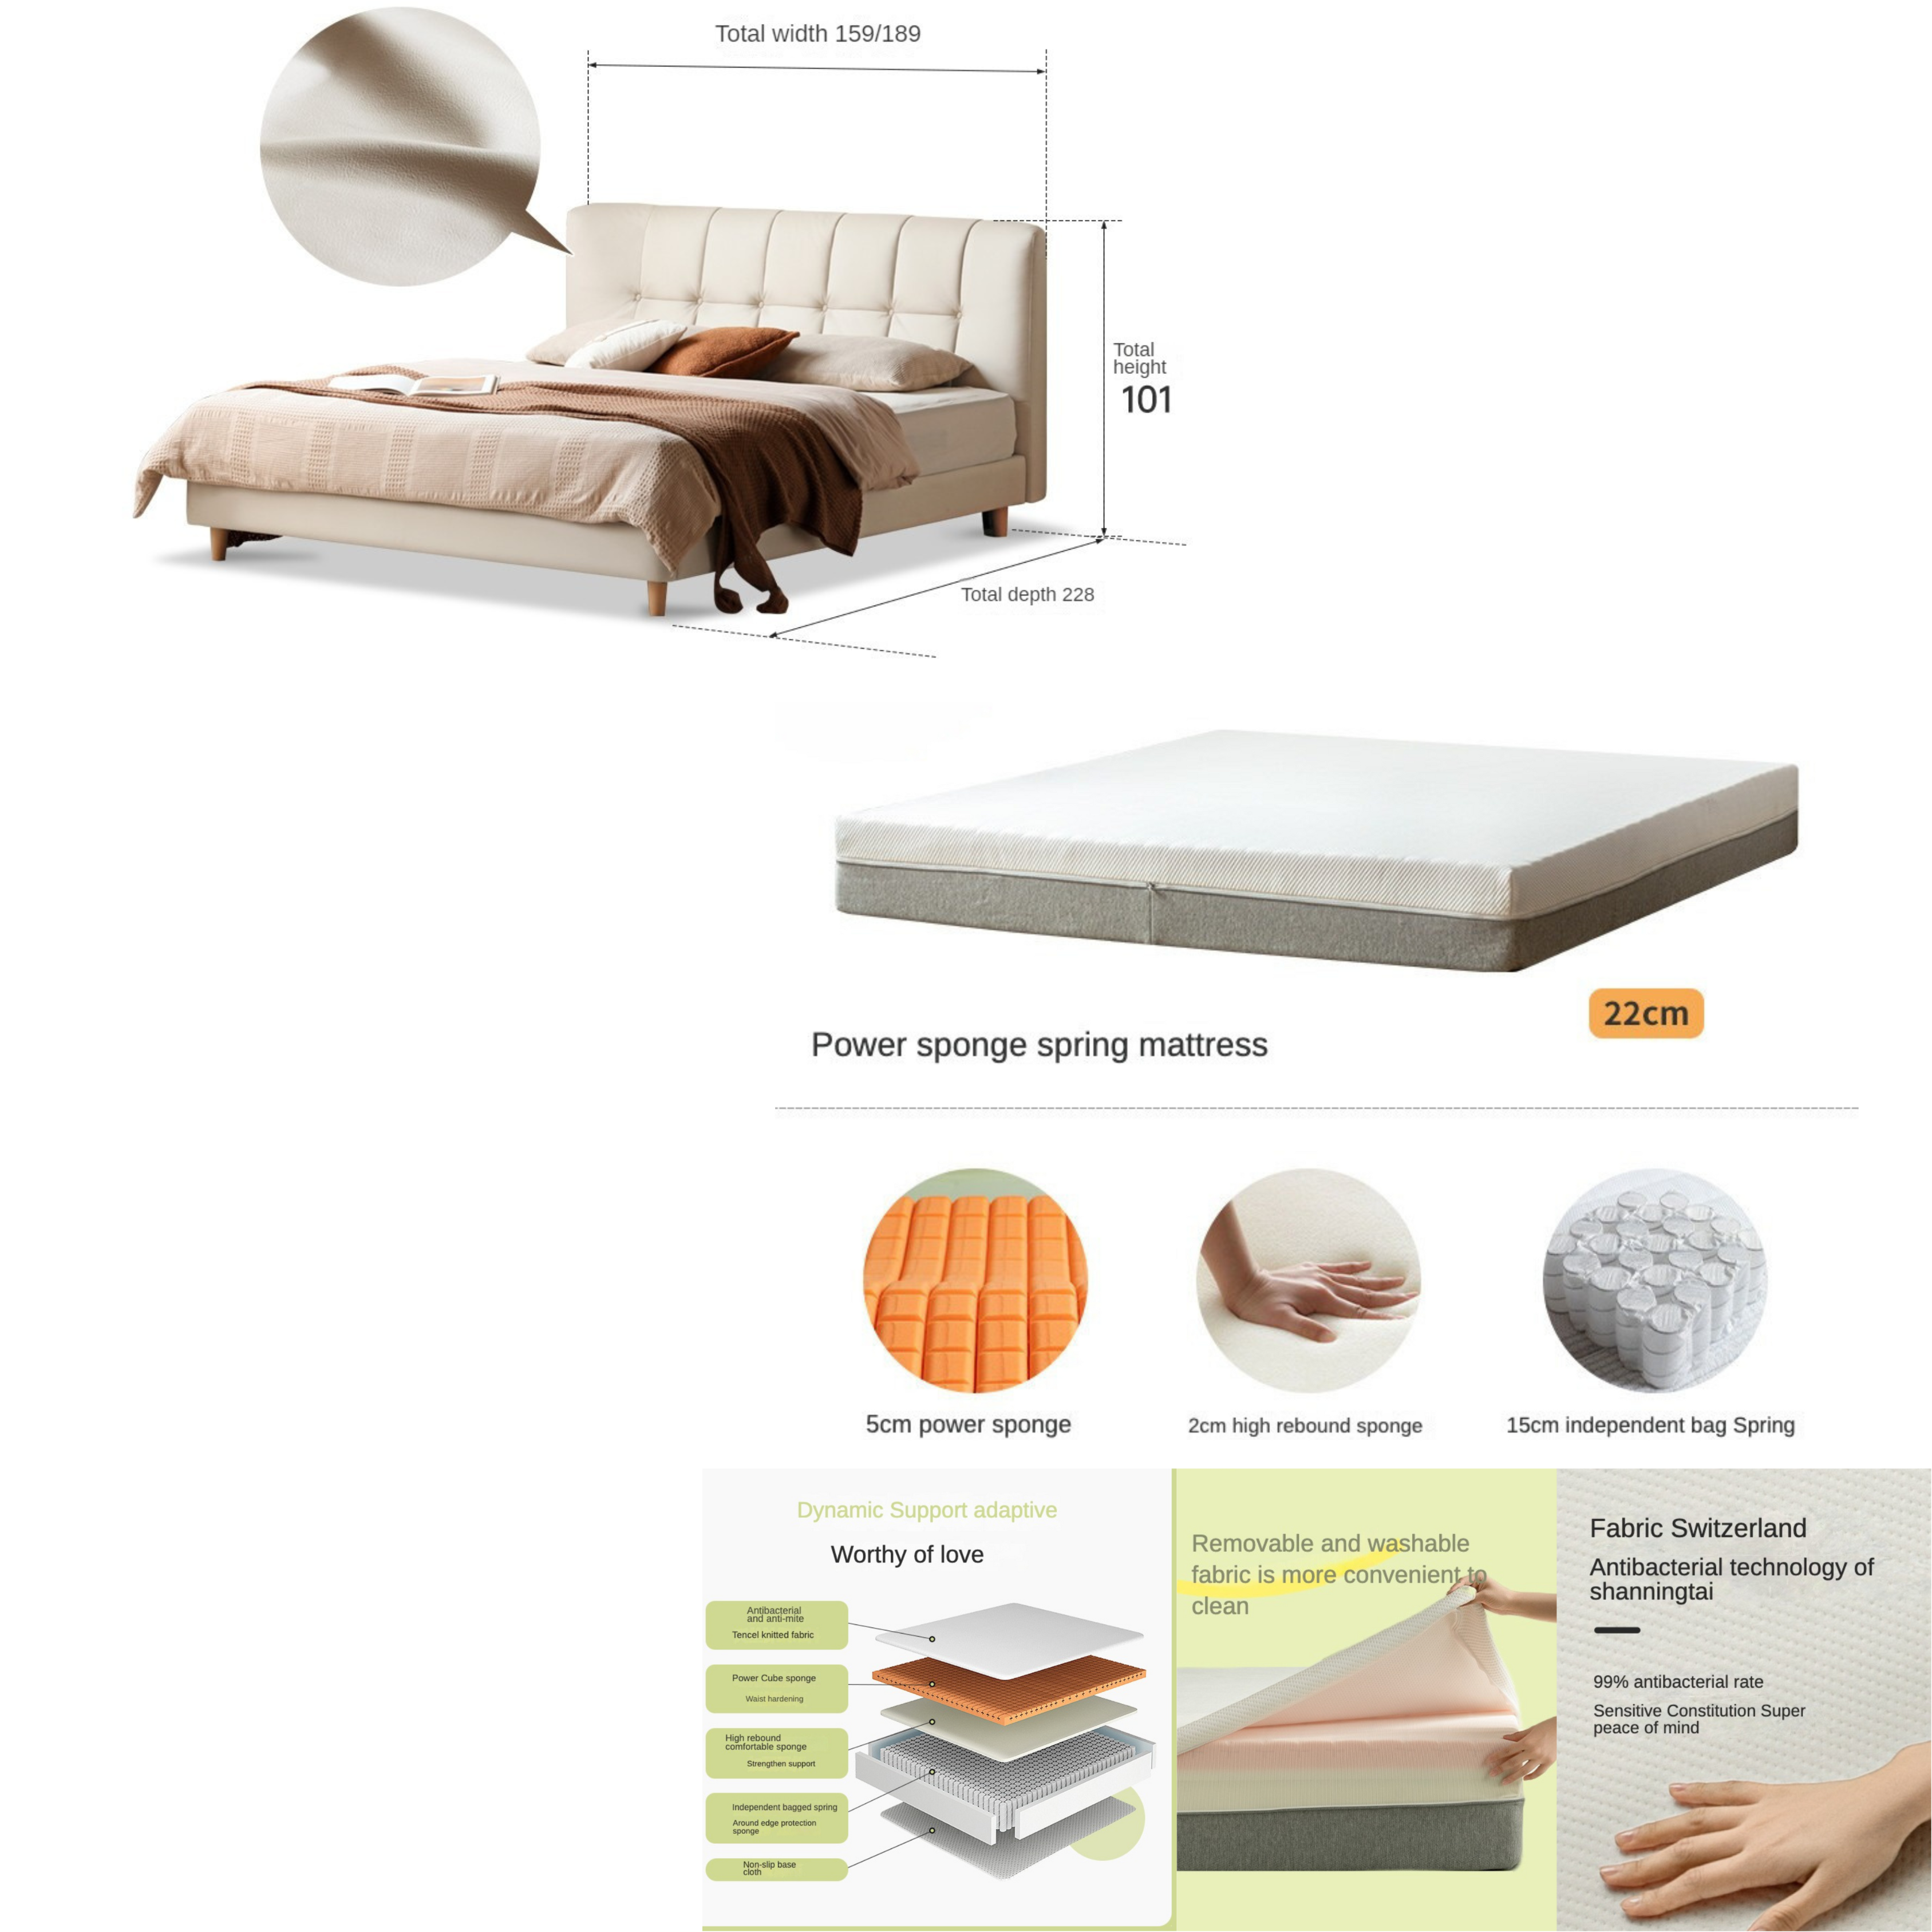 Technology cloth white cream style edge bed_)